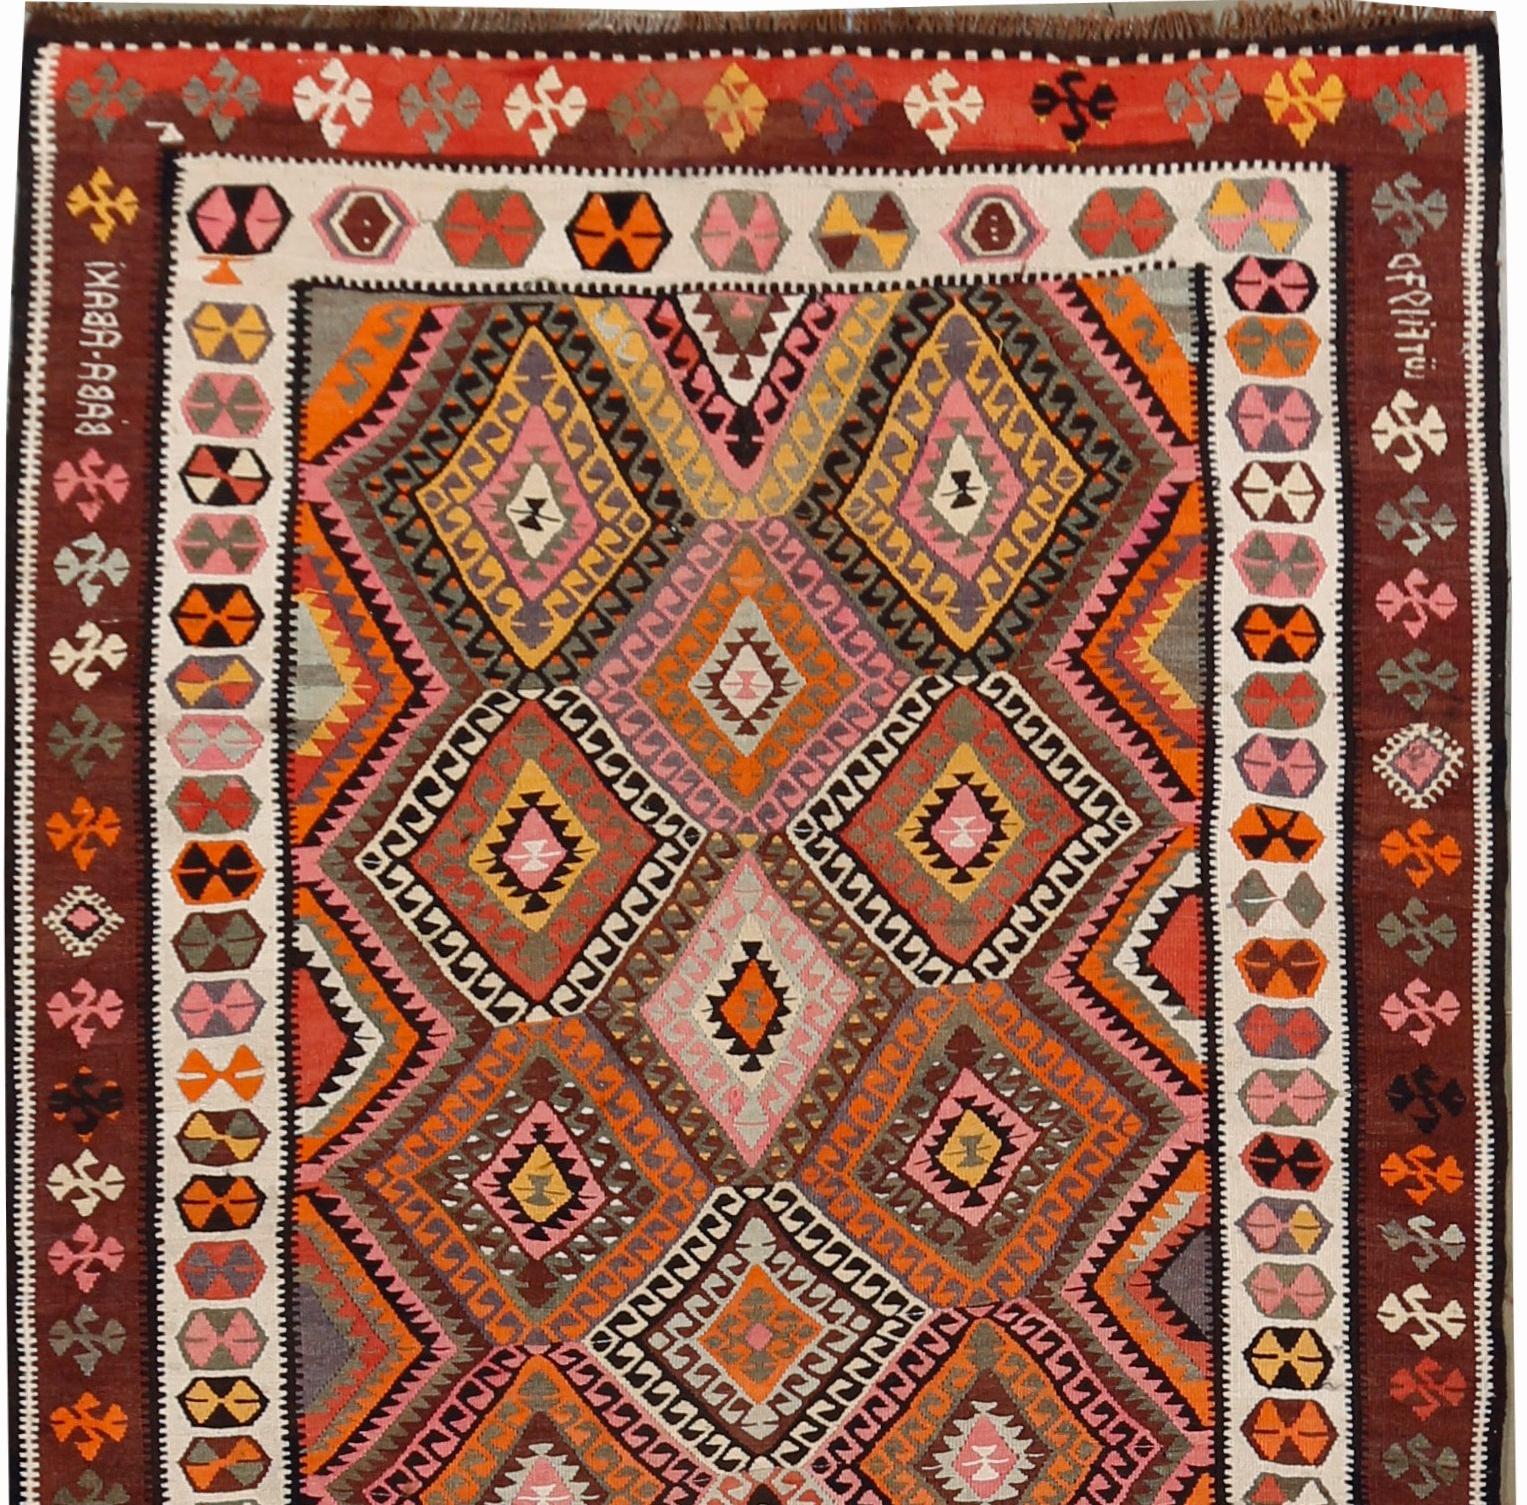 Vintage Turkish Kilim runner rug, This vintage Turkish flat-weave Kilim was handwoven in the 1950s. The simplicity and boldness of these pieces can also give a contemporary feel and can look at home in both a modern or traditional setting. Size: 5'9